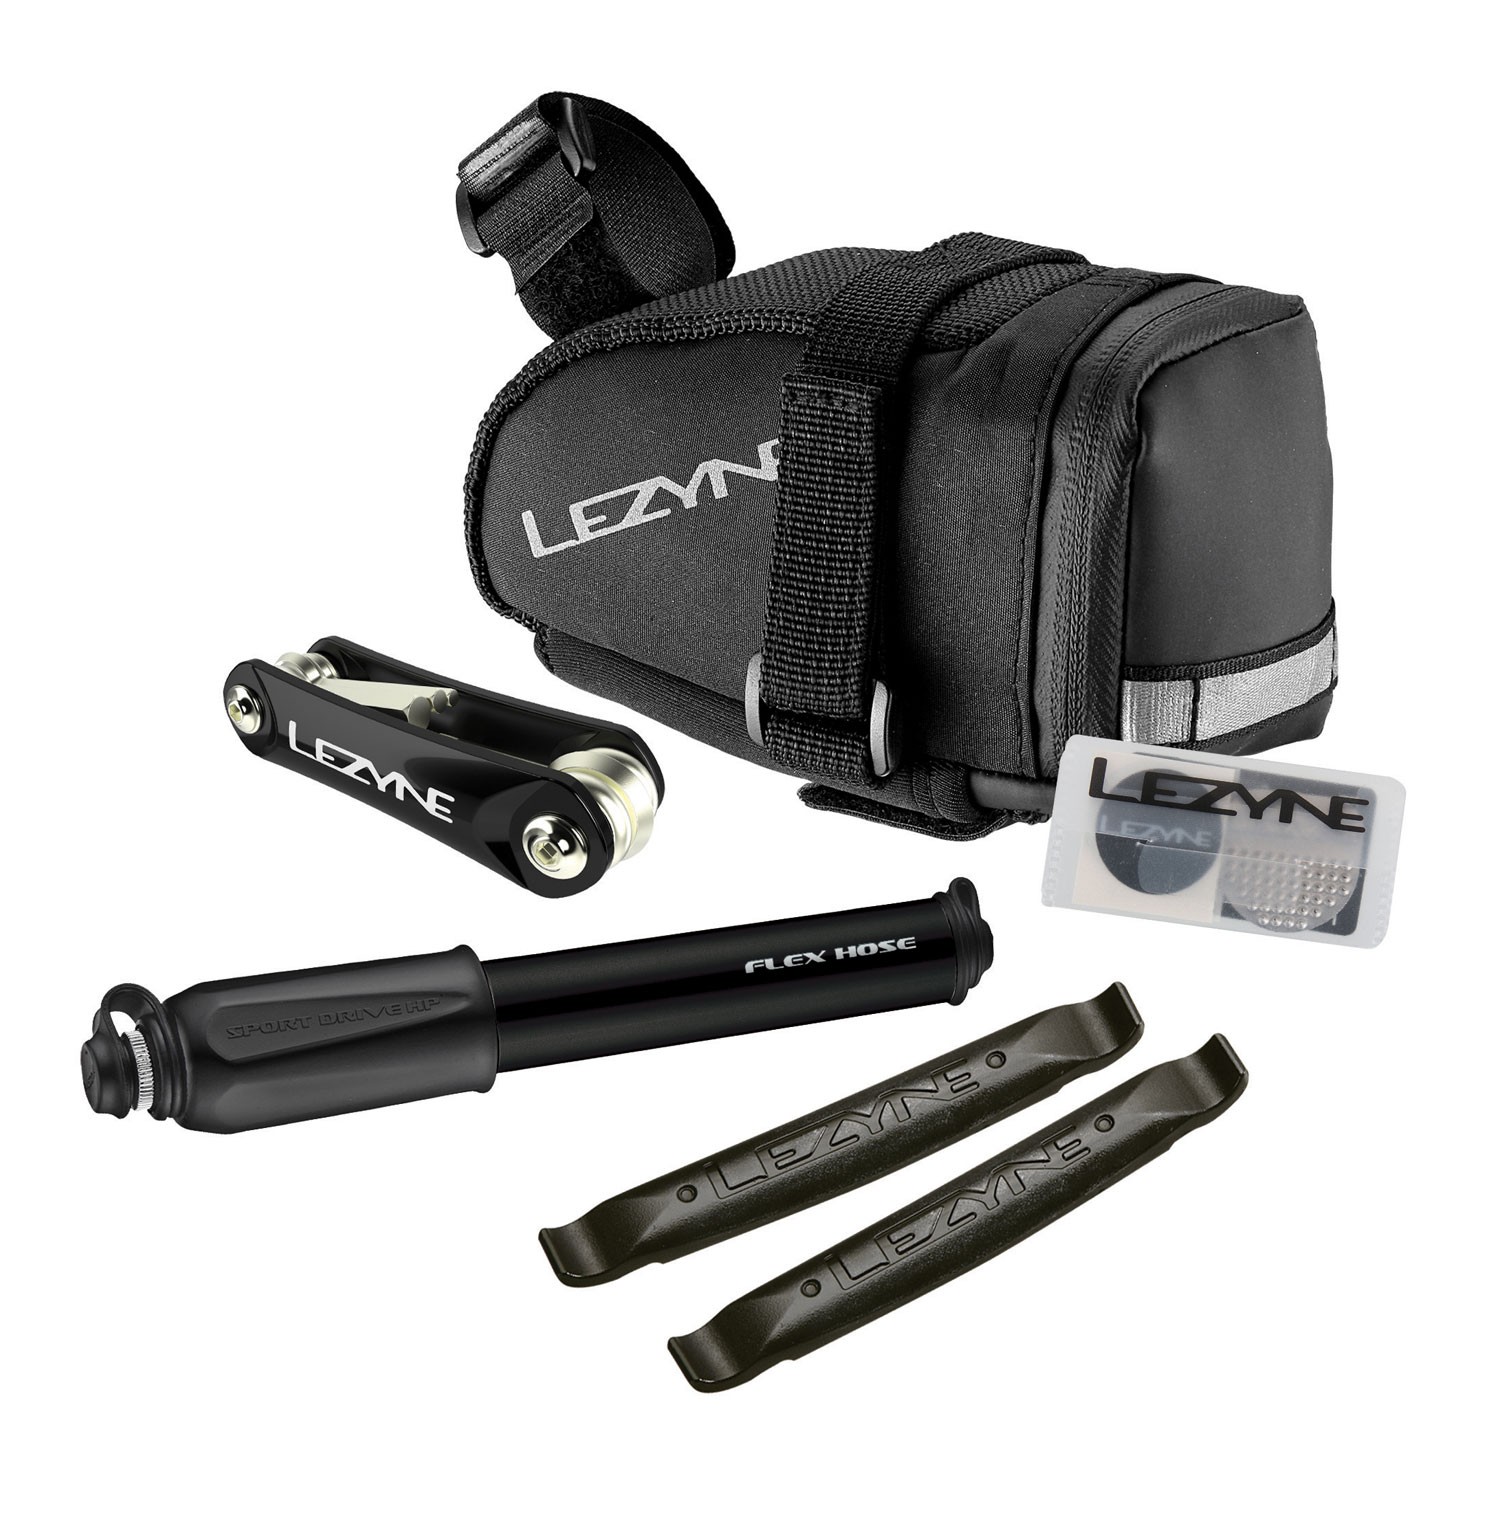 kit complet - M CADDY SPORTkit